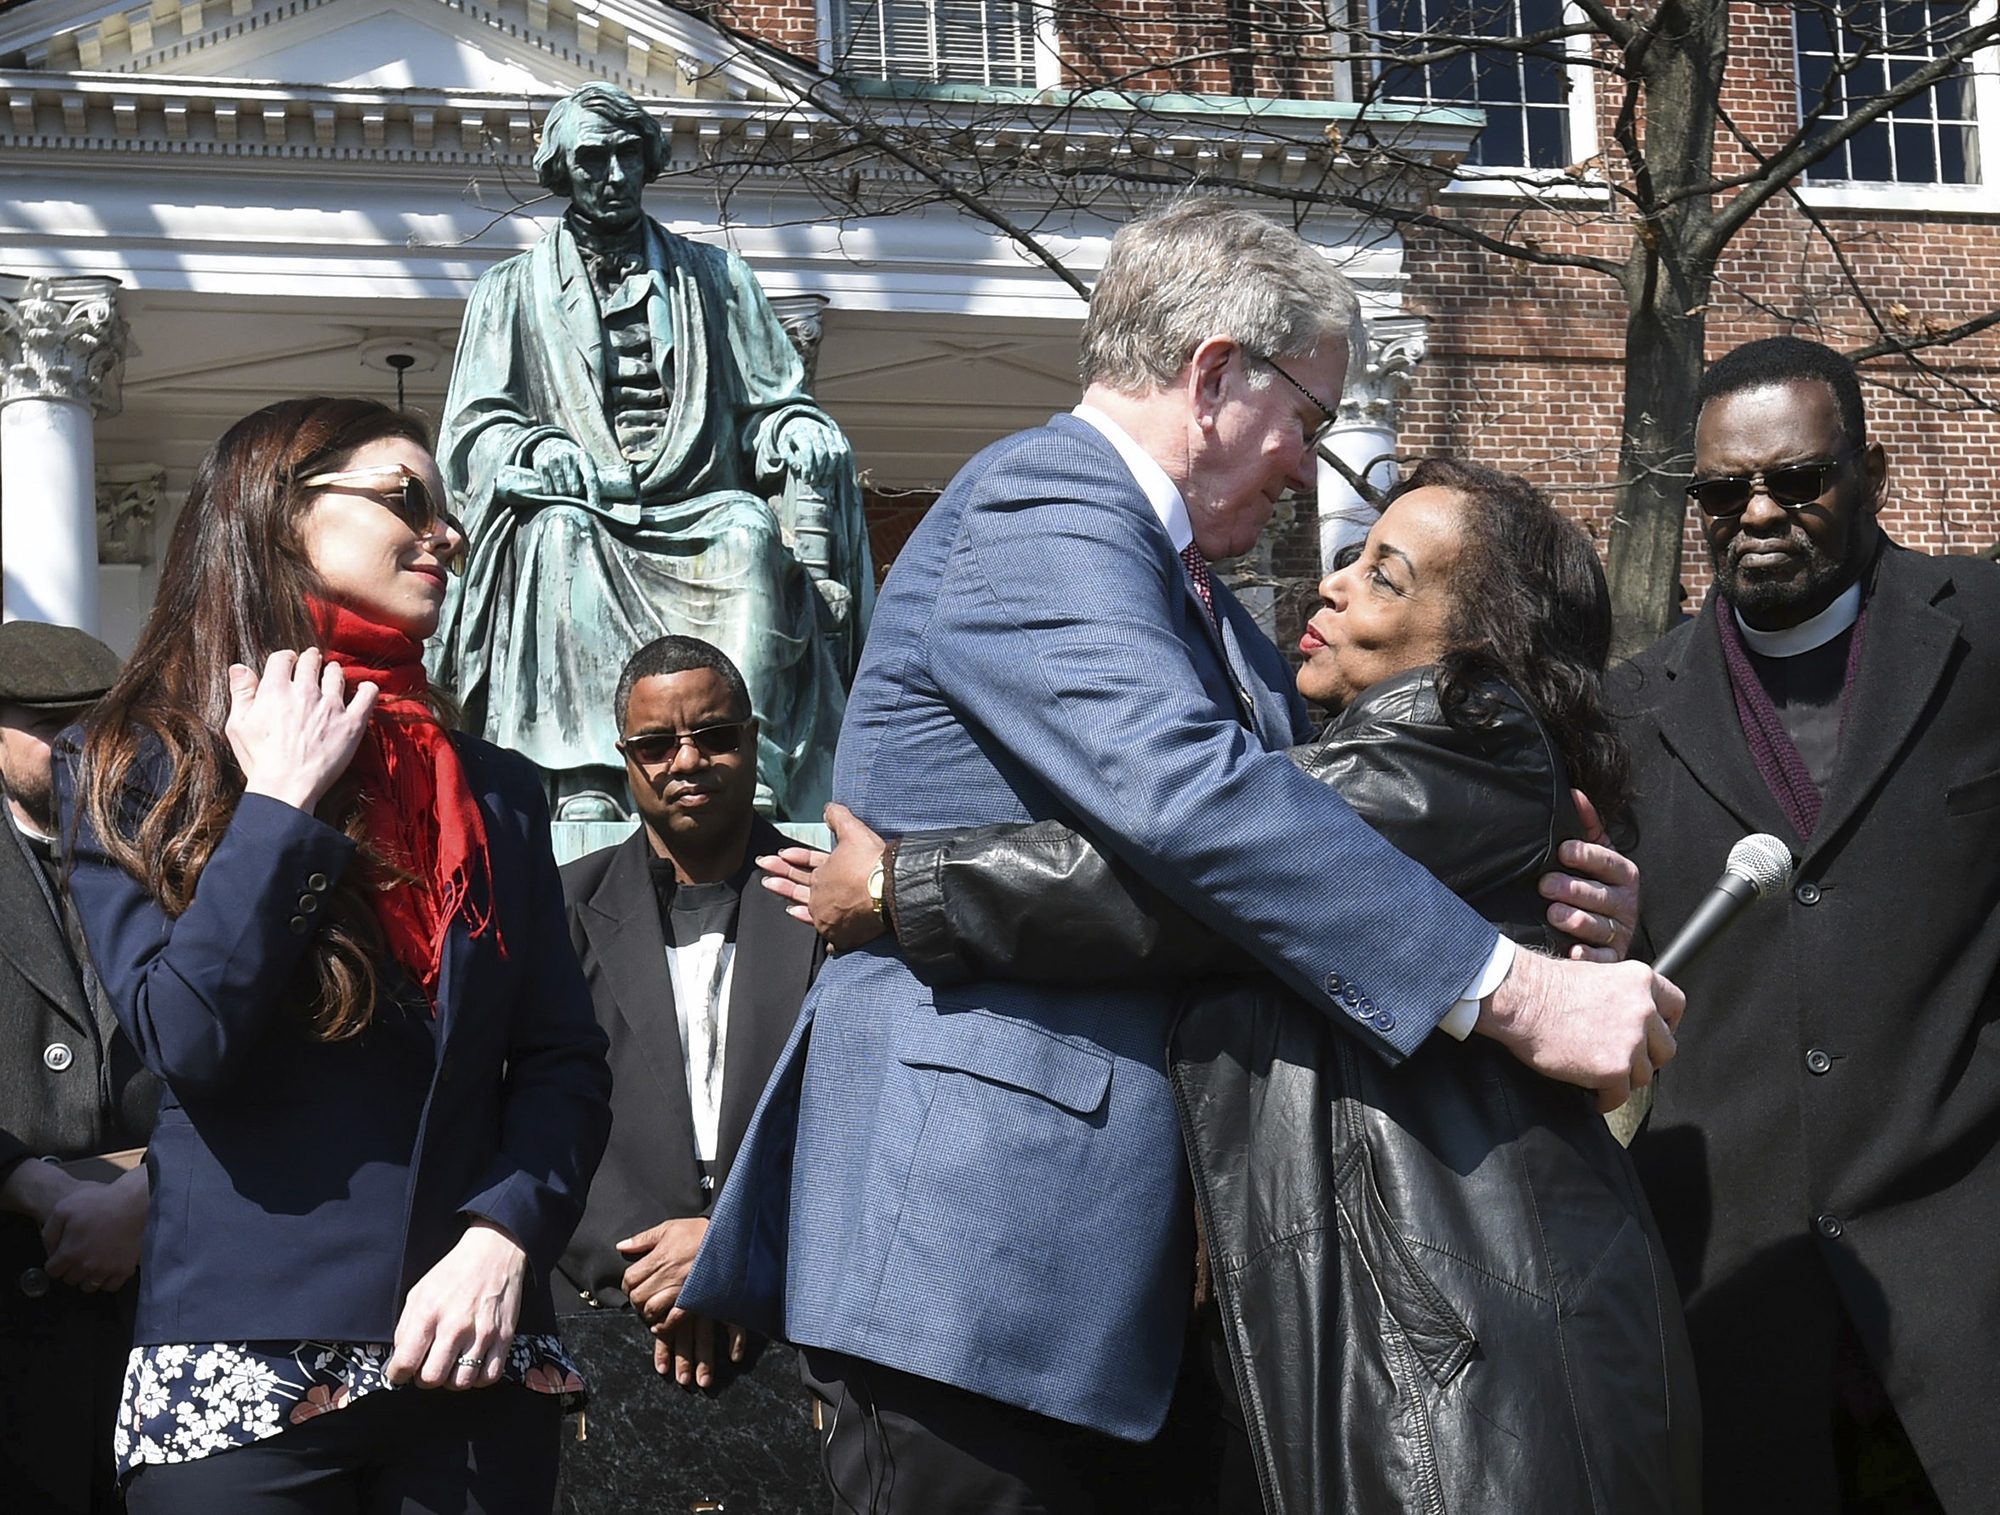 Lynne Jackson (R), a descendant of Dred Scott, hugs Charles Taney III, a descendant of U.S. Supreme Court Chief Justice Roger Taney, on the 160th anniversary of the Dred Scott decision in front of the Maryland State House on March 6, 2017, in Annapolis, Md. (Kenneth K. Lam—The Baltimore Sun/AP)